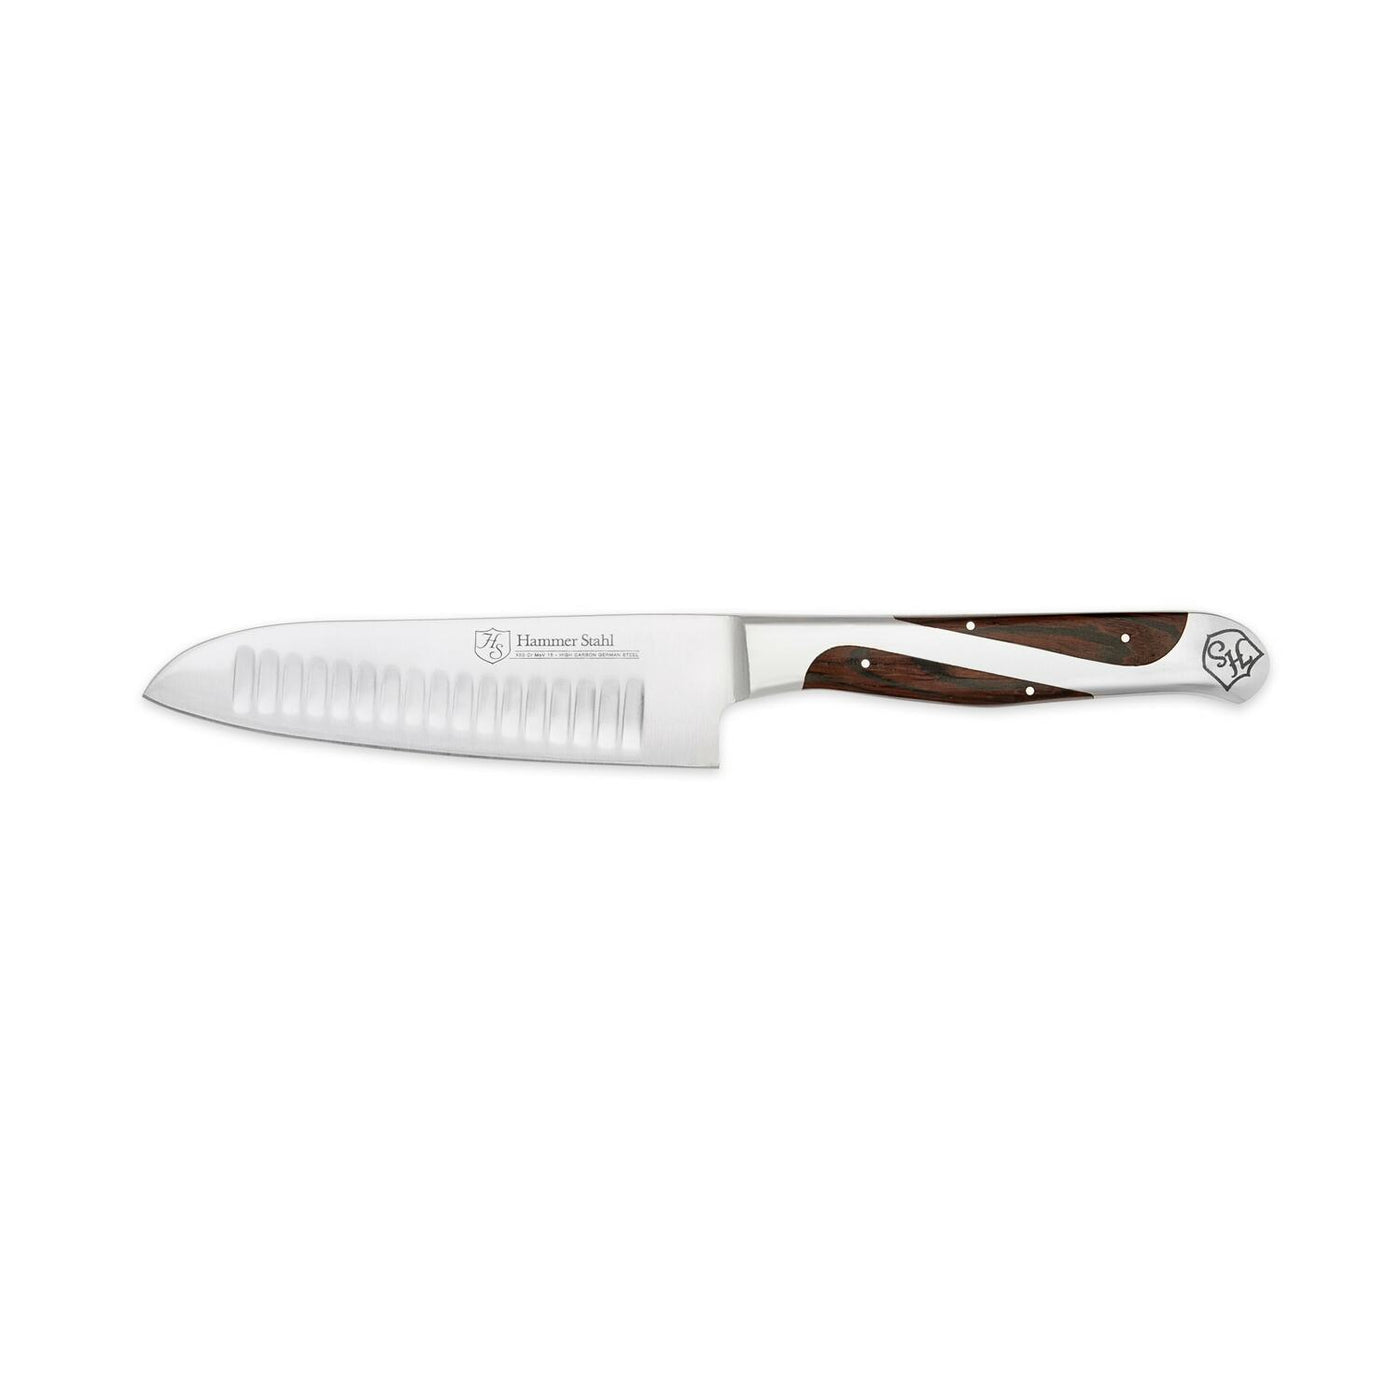 Heritage Steel 5 inch bar Knife by Hammer Stahl